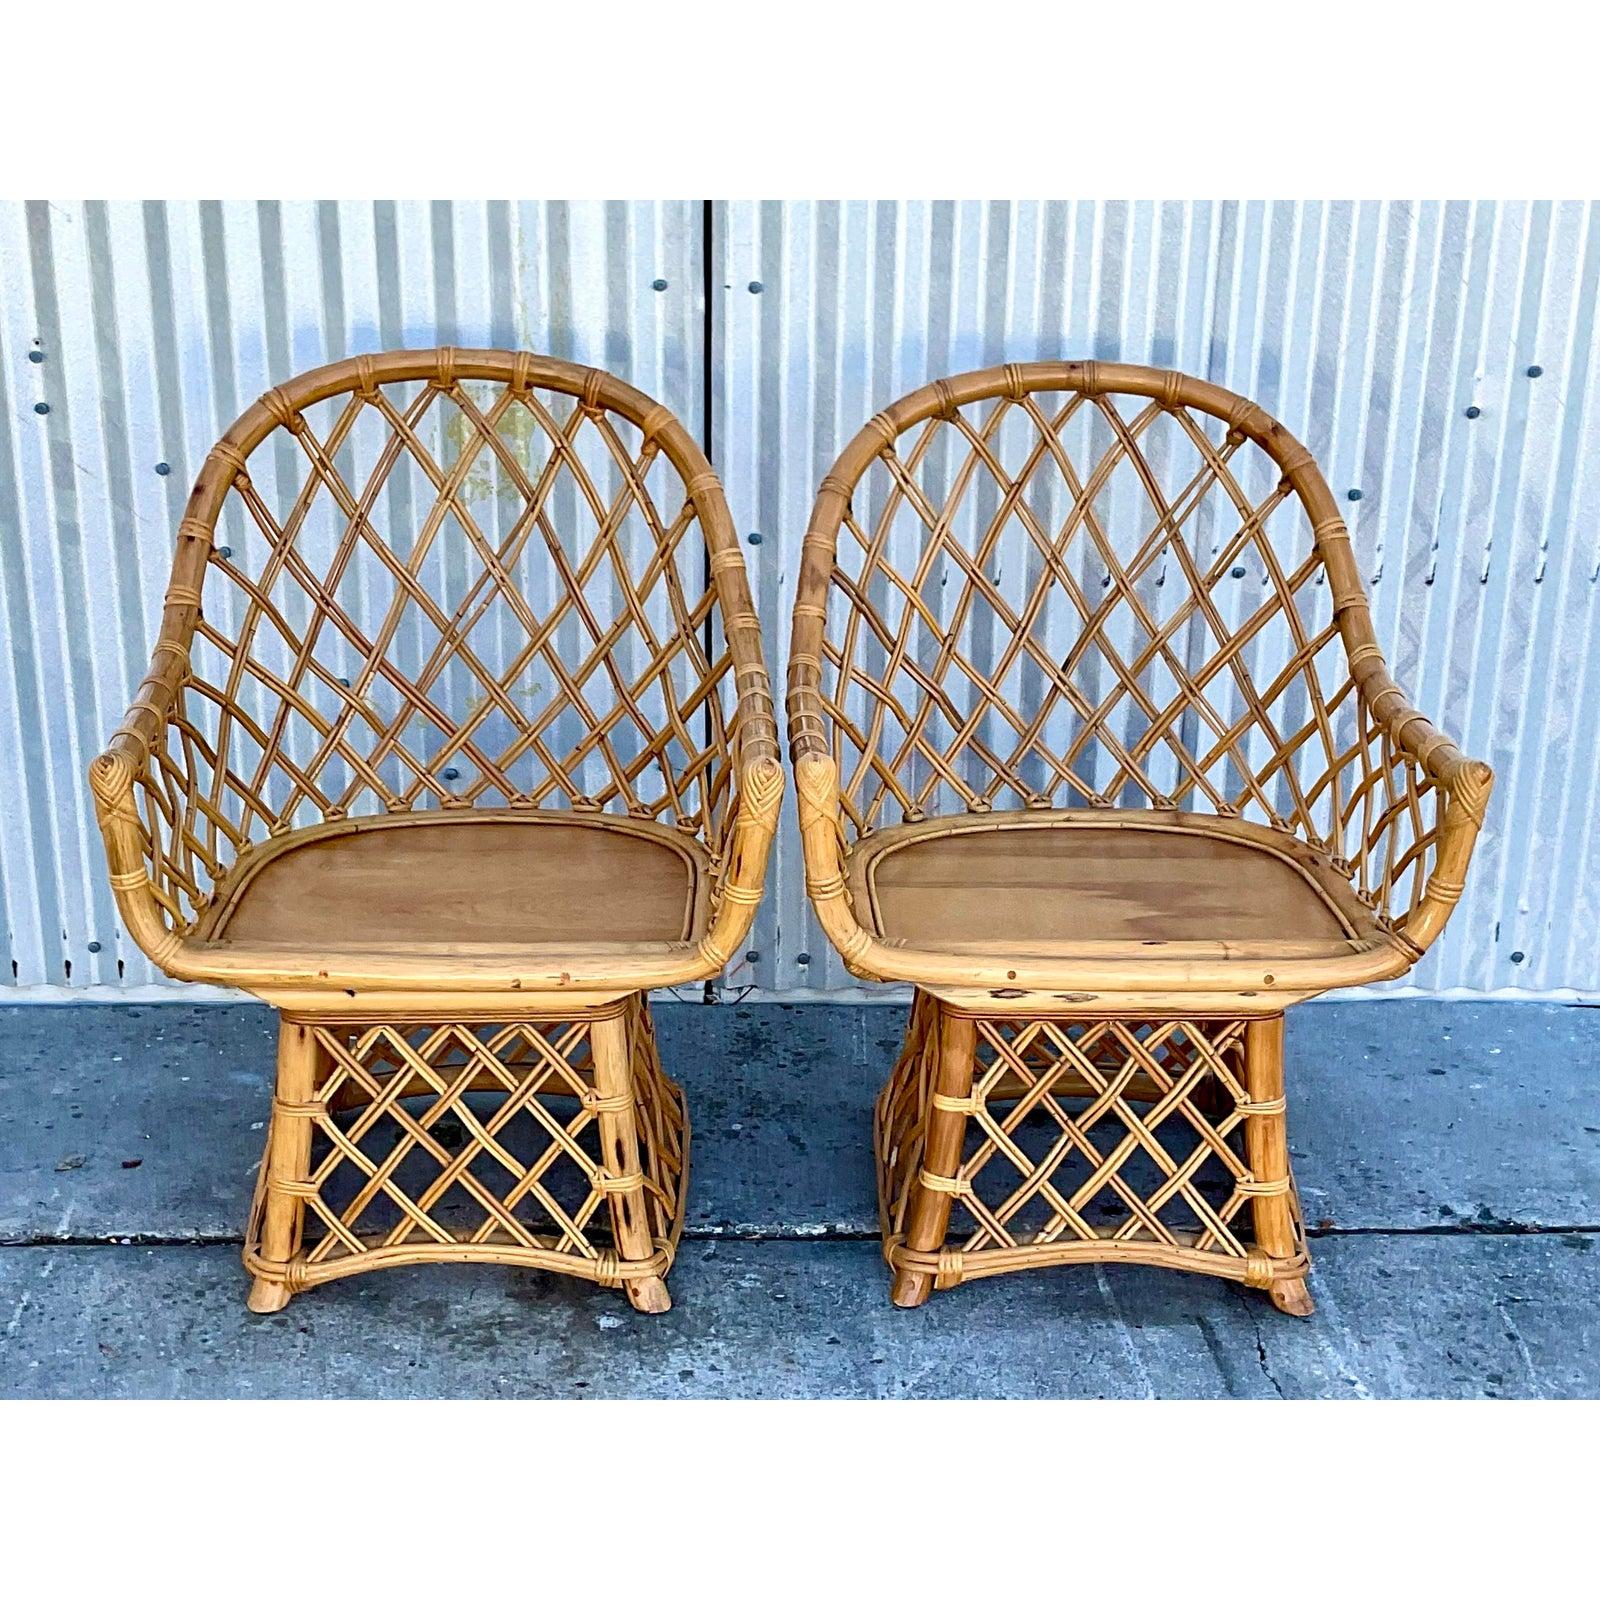 Stunning pair of vintage Coastal swivel chairs. Iconic wrap around rattan fretwork made famous by Willow and Reed. Unmarked. Acquired from a Palm Beach estate.